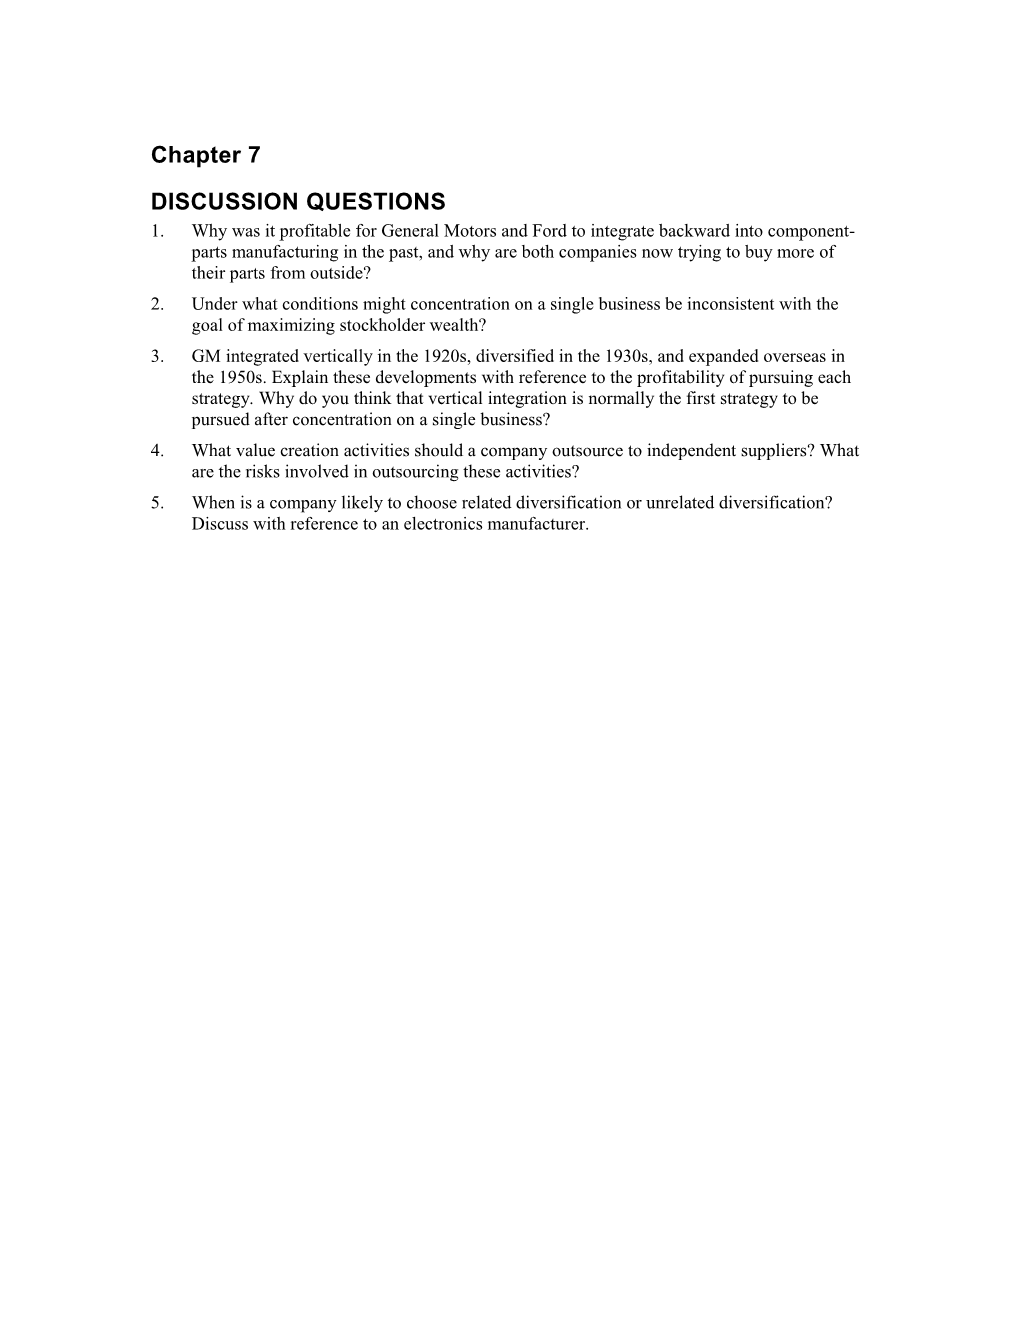 Discussion Questions s1